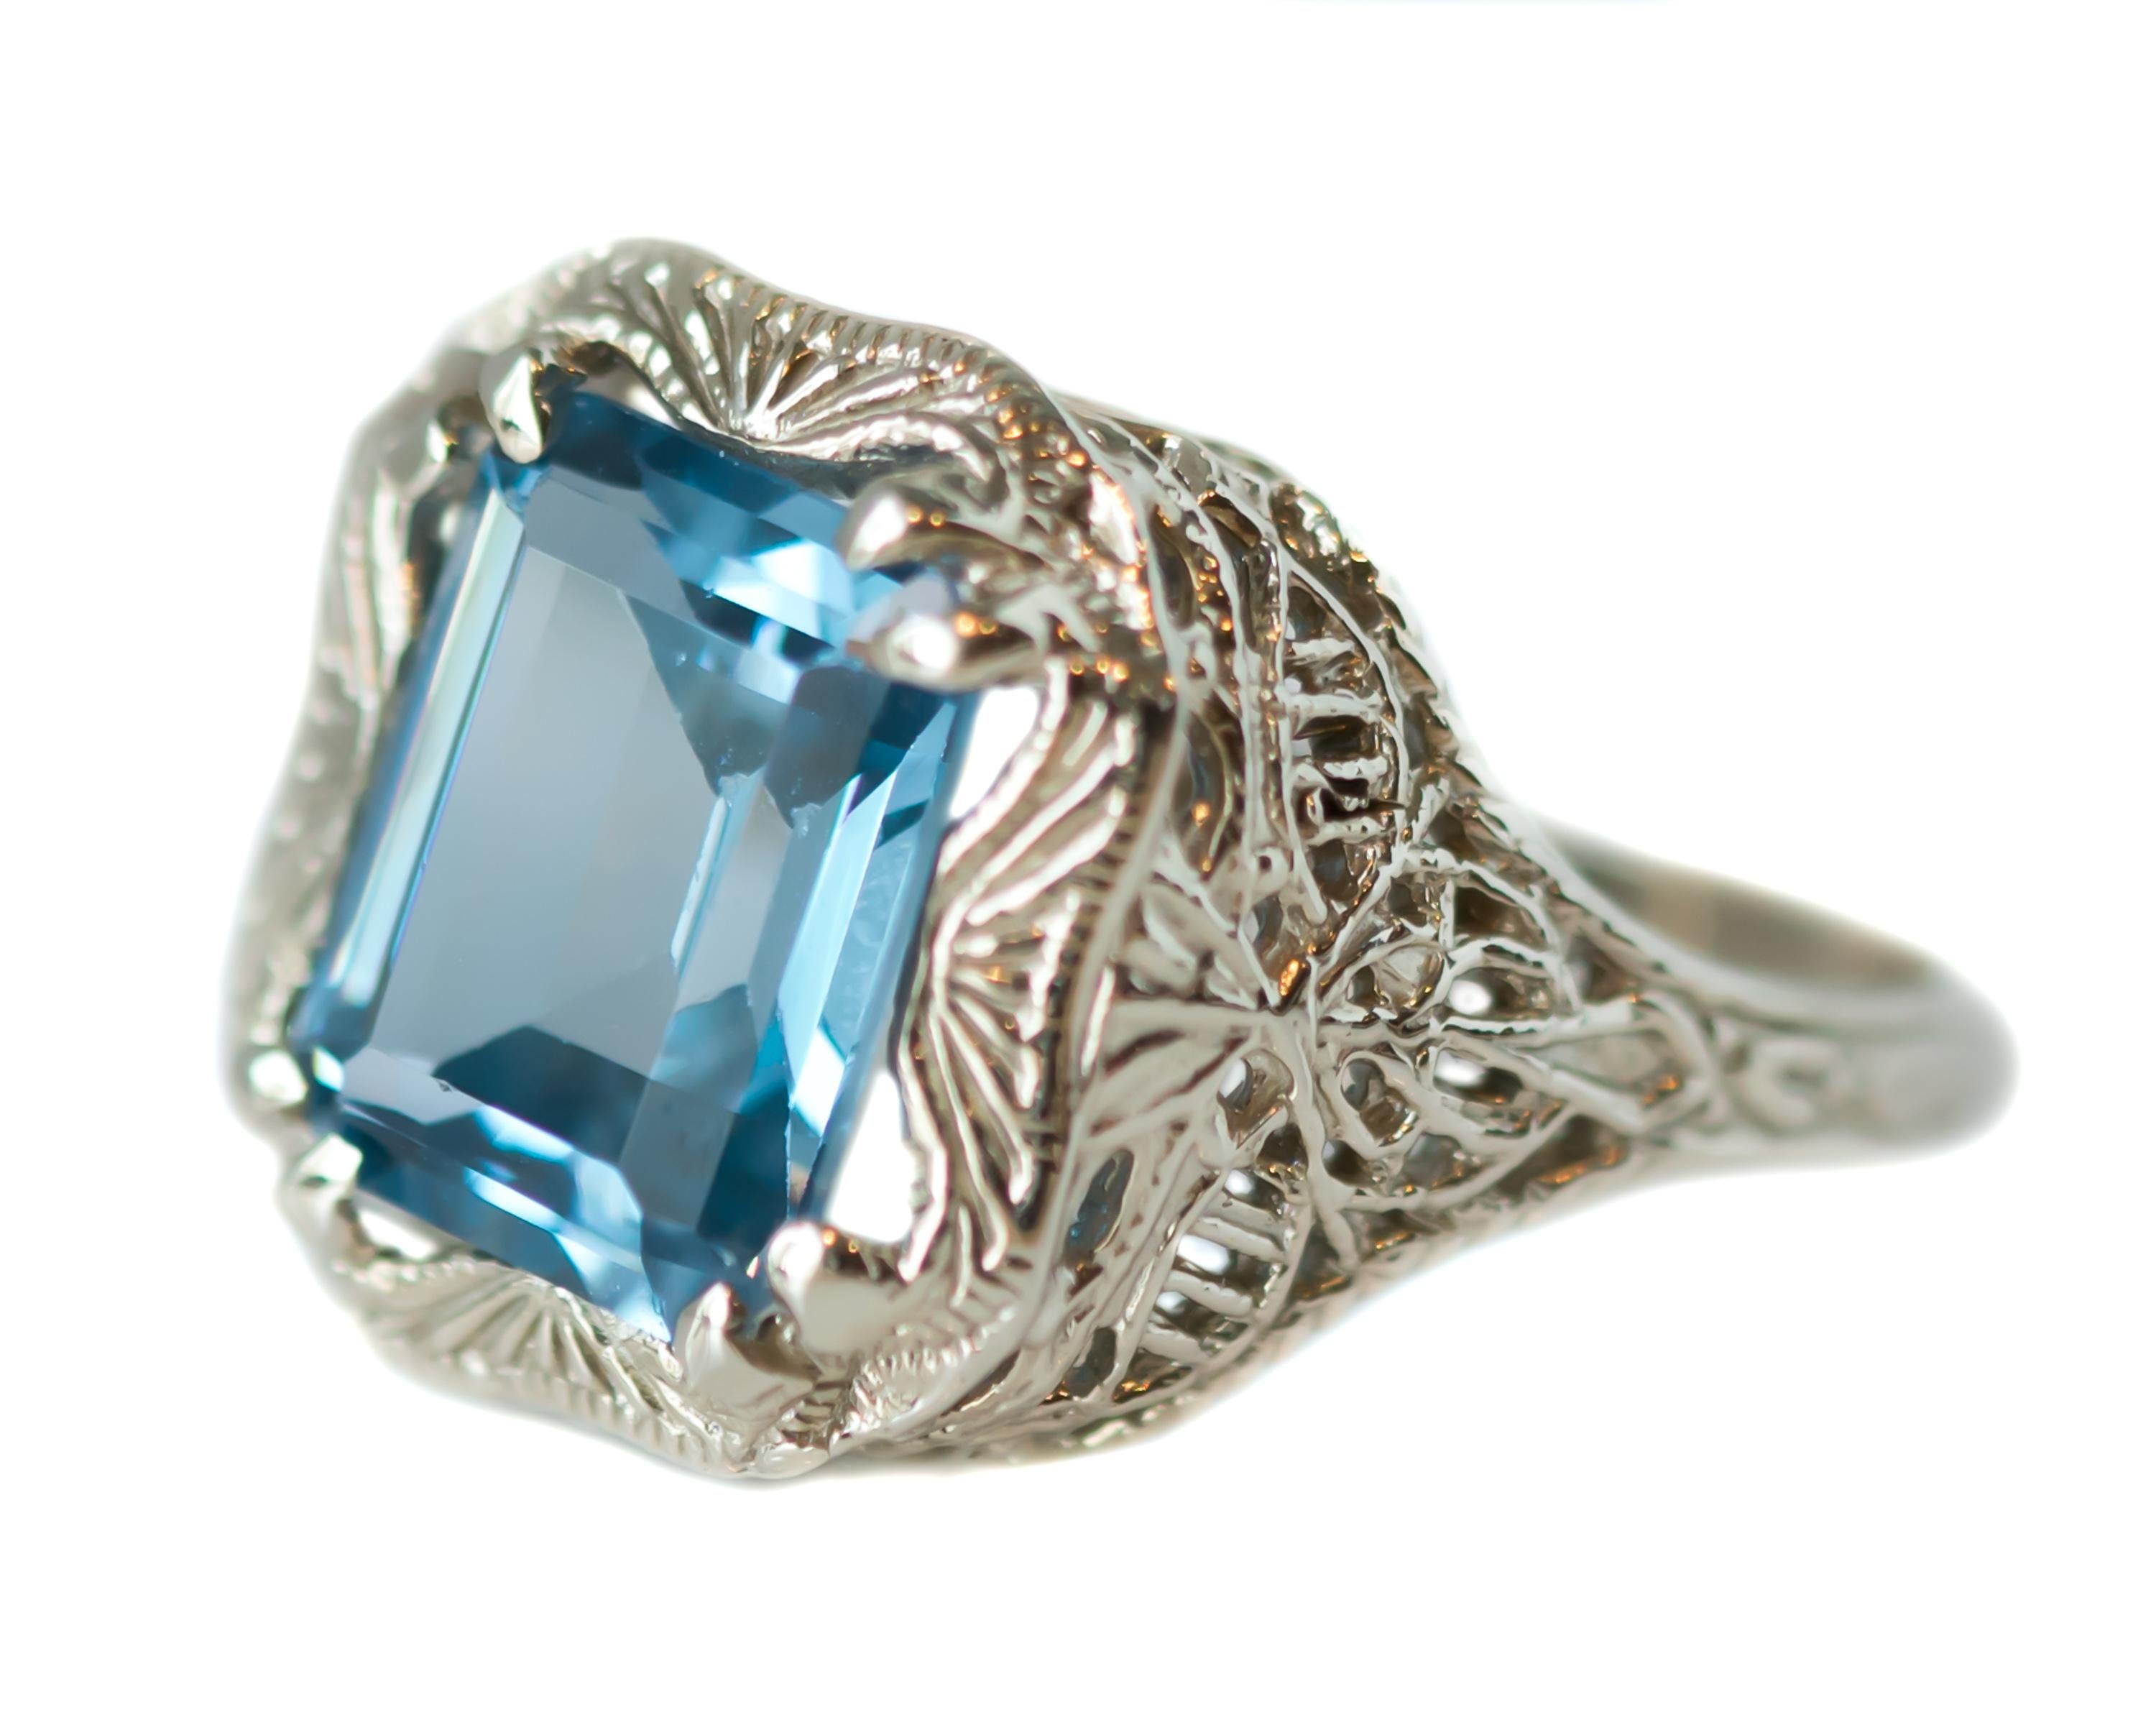 1920s Art Deco 3 carat Blue Topaz Ring - 14 Karat White Gold, Blue Topaz

Features:
3 Carat Emerald cut Blue Topaz
14 Karat White Gold Filigree Setting
4-Prong Setting
Open Filigree Gallery and Shoulders
Shank tapers to 1.75 millimeters at center